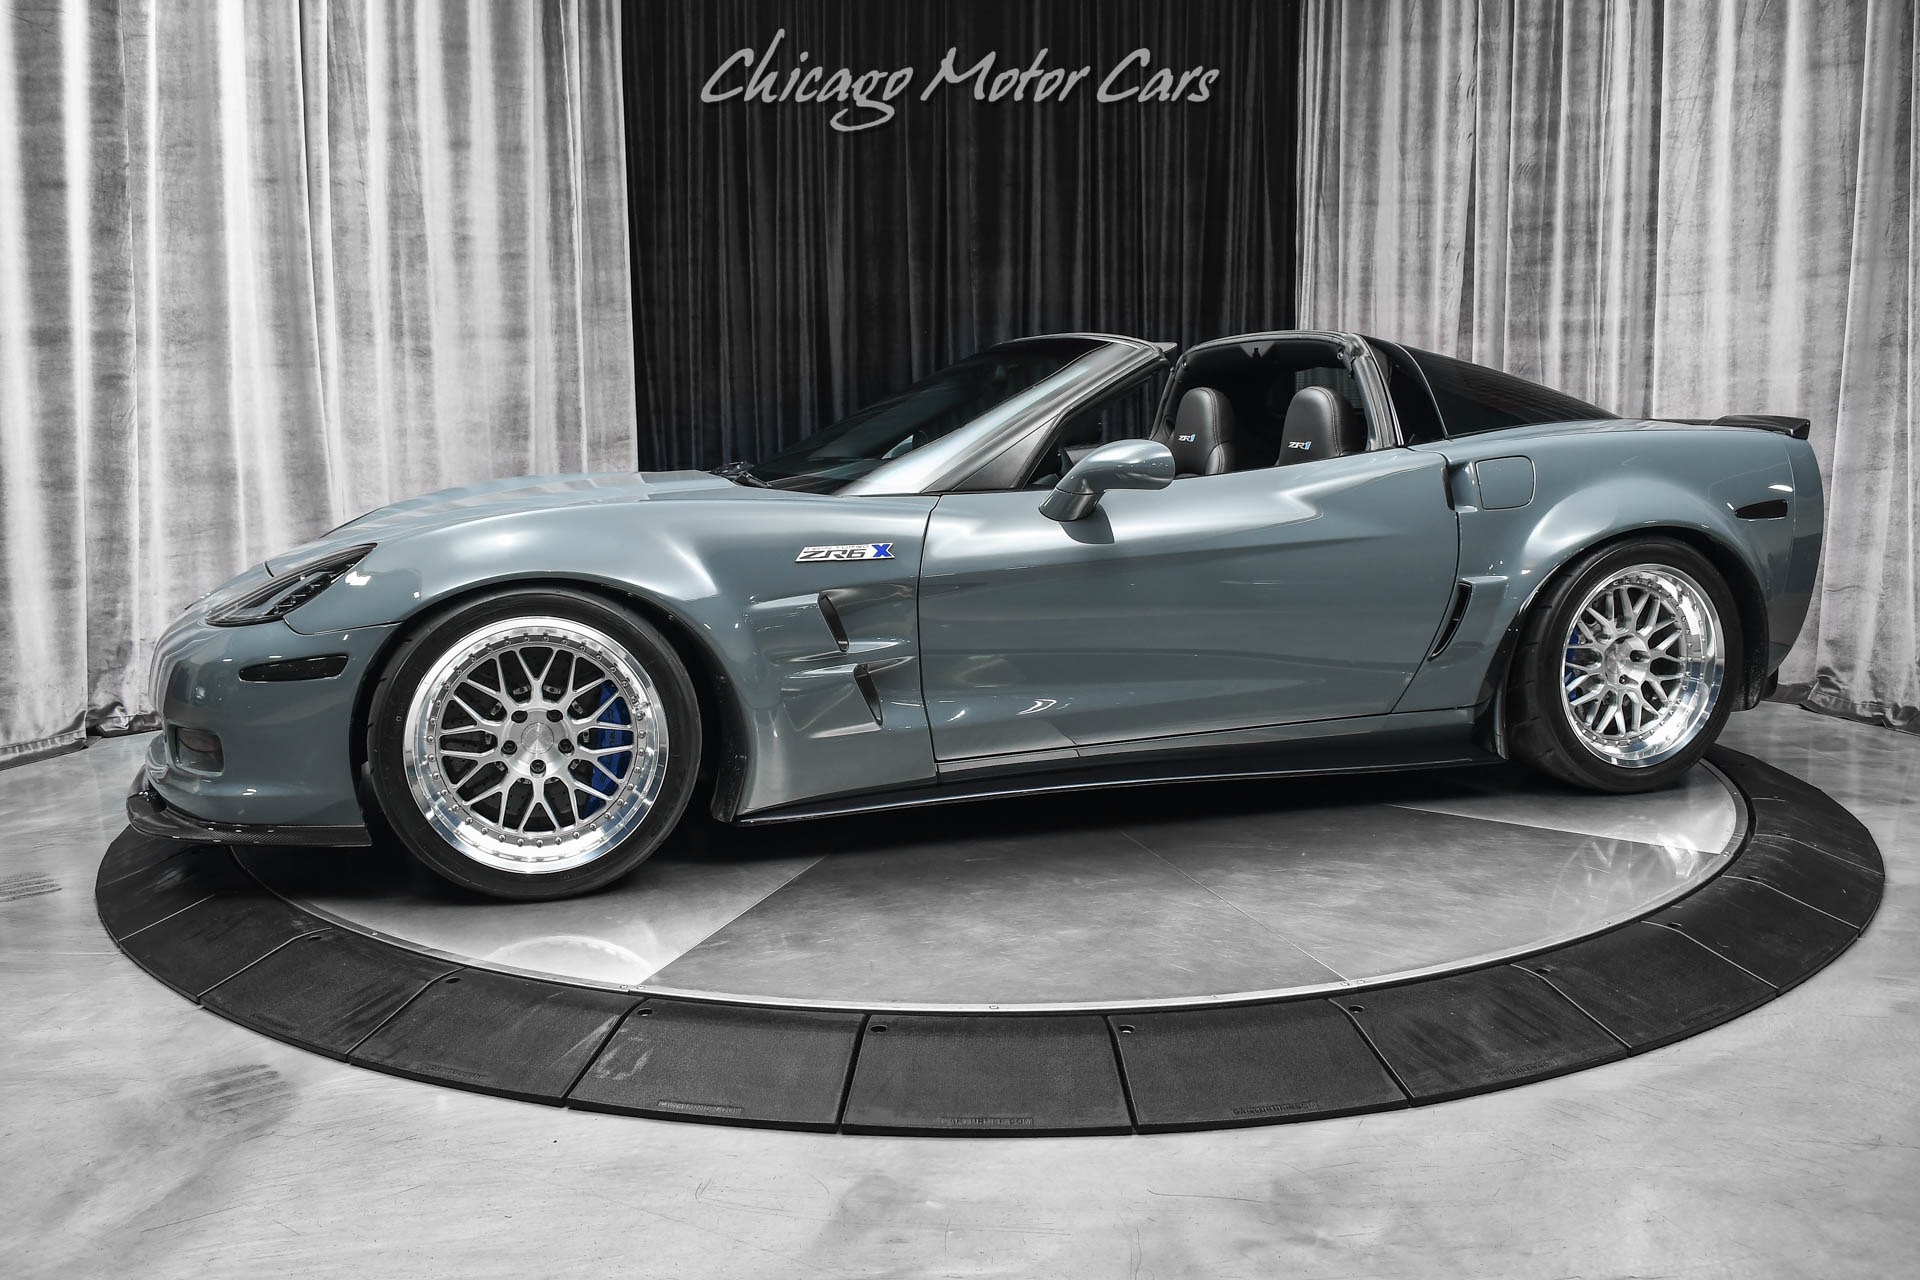 Used 2008 Chevrolet Corvette ZR6X WIDEBODY! TWIN TURBO! 700HP! ZR1 BRAKES!  OVER $50k IN MODS! For Sale ($54,800) | Chicago Motor Cars Stock  #85131824-HS